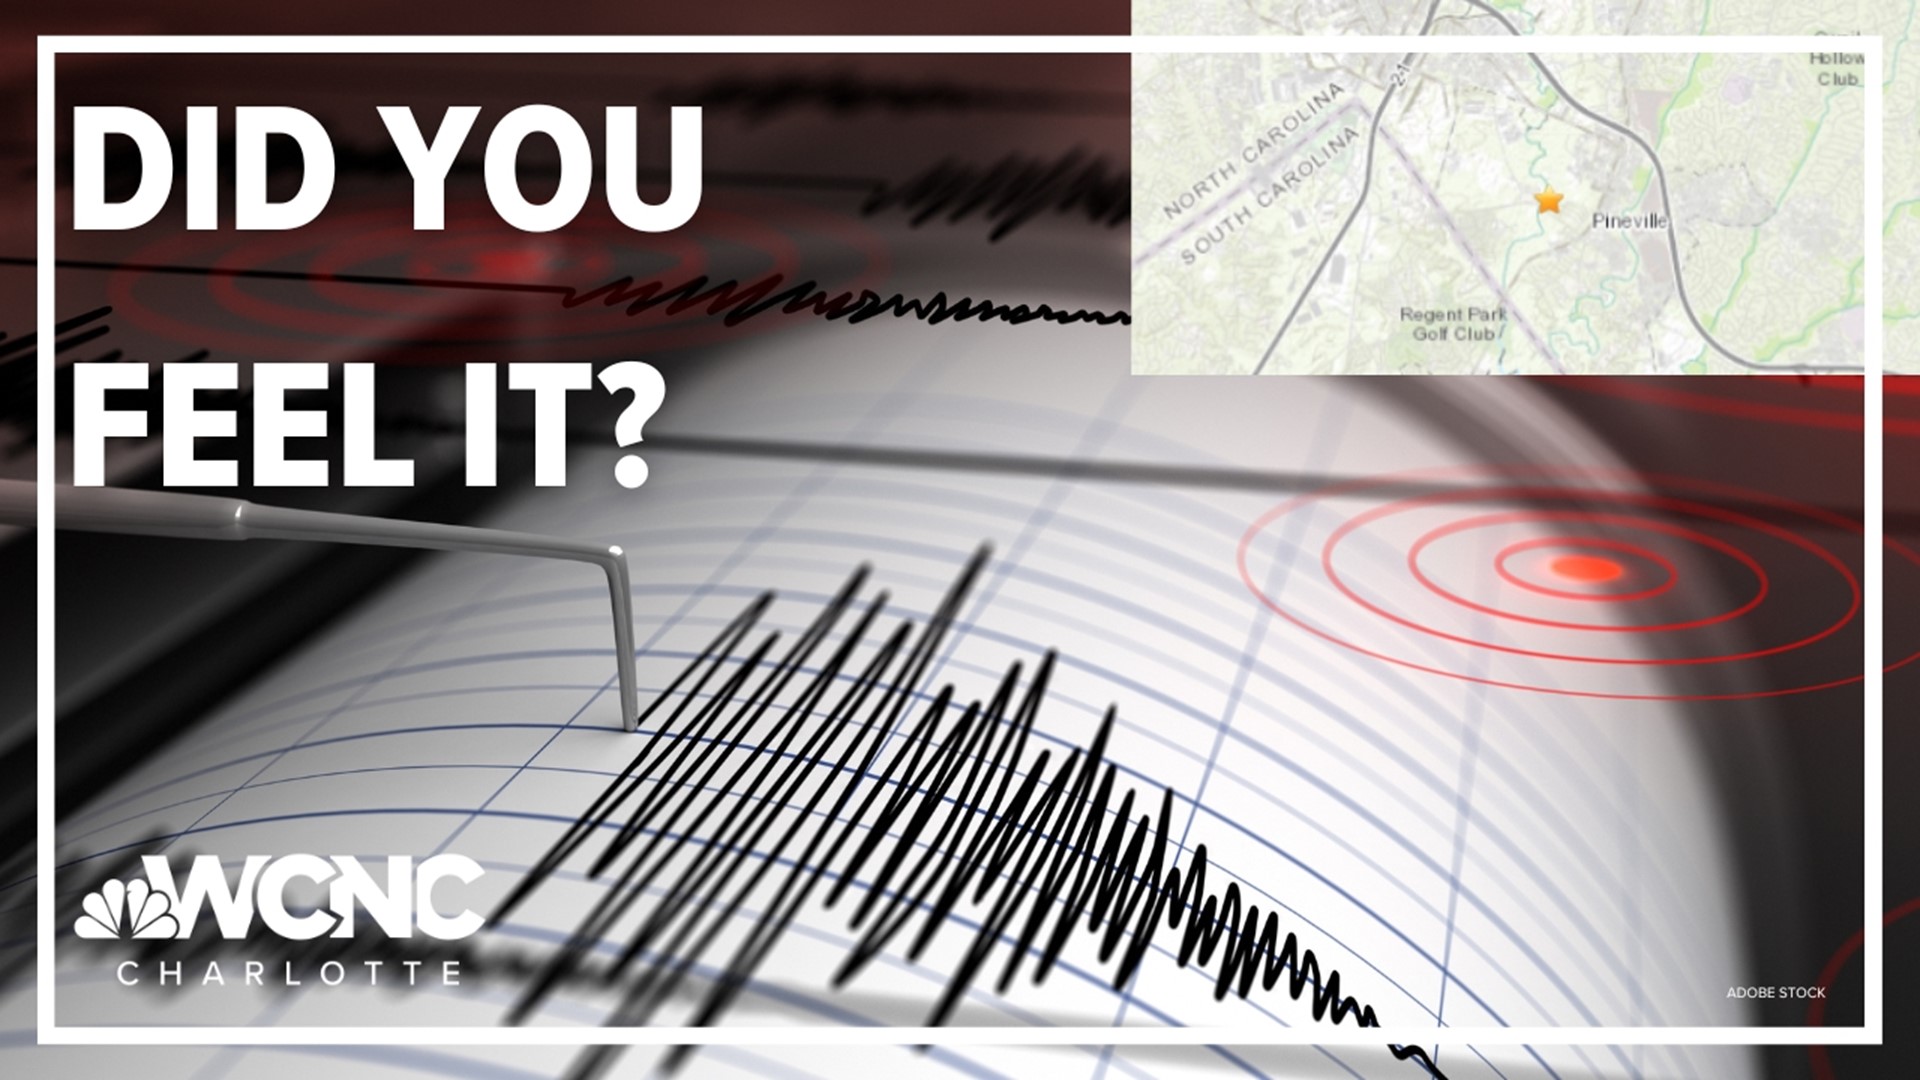 The earthquake was registered with a magnitude of 2.1 at 5:56:05 a.m. EDT, according to USGS.